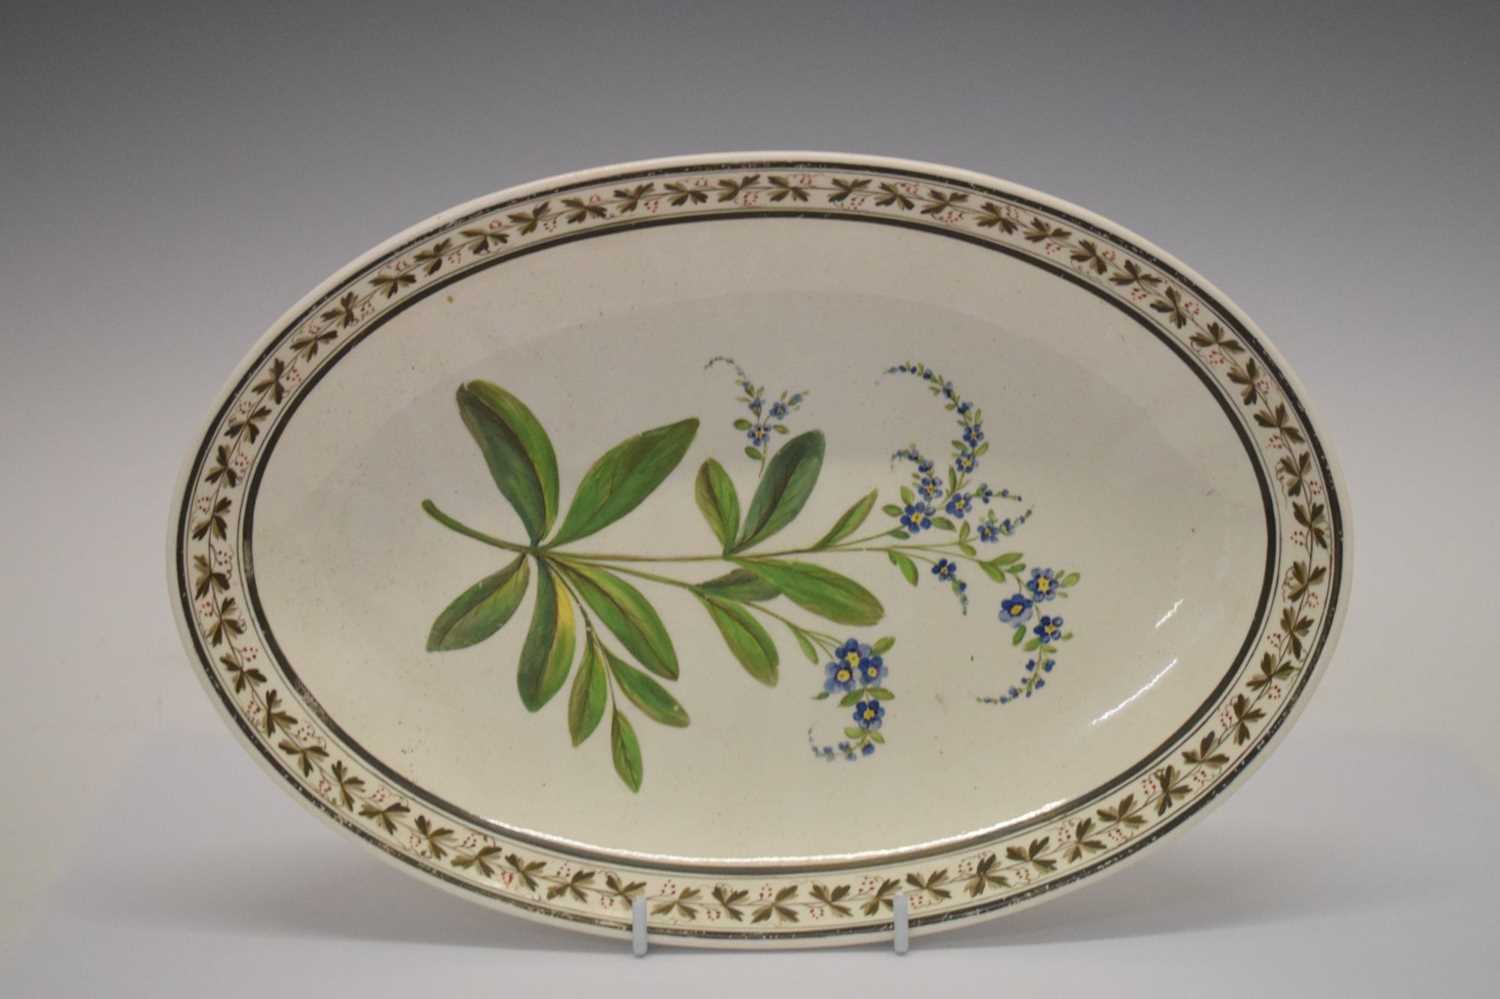 Early 19th Century Wedgwood cream ware oval dish, - Image 2 of 3